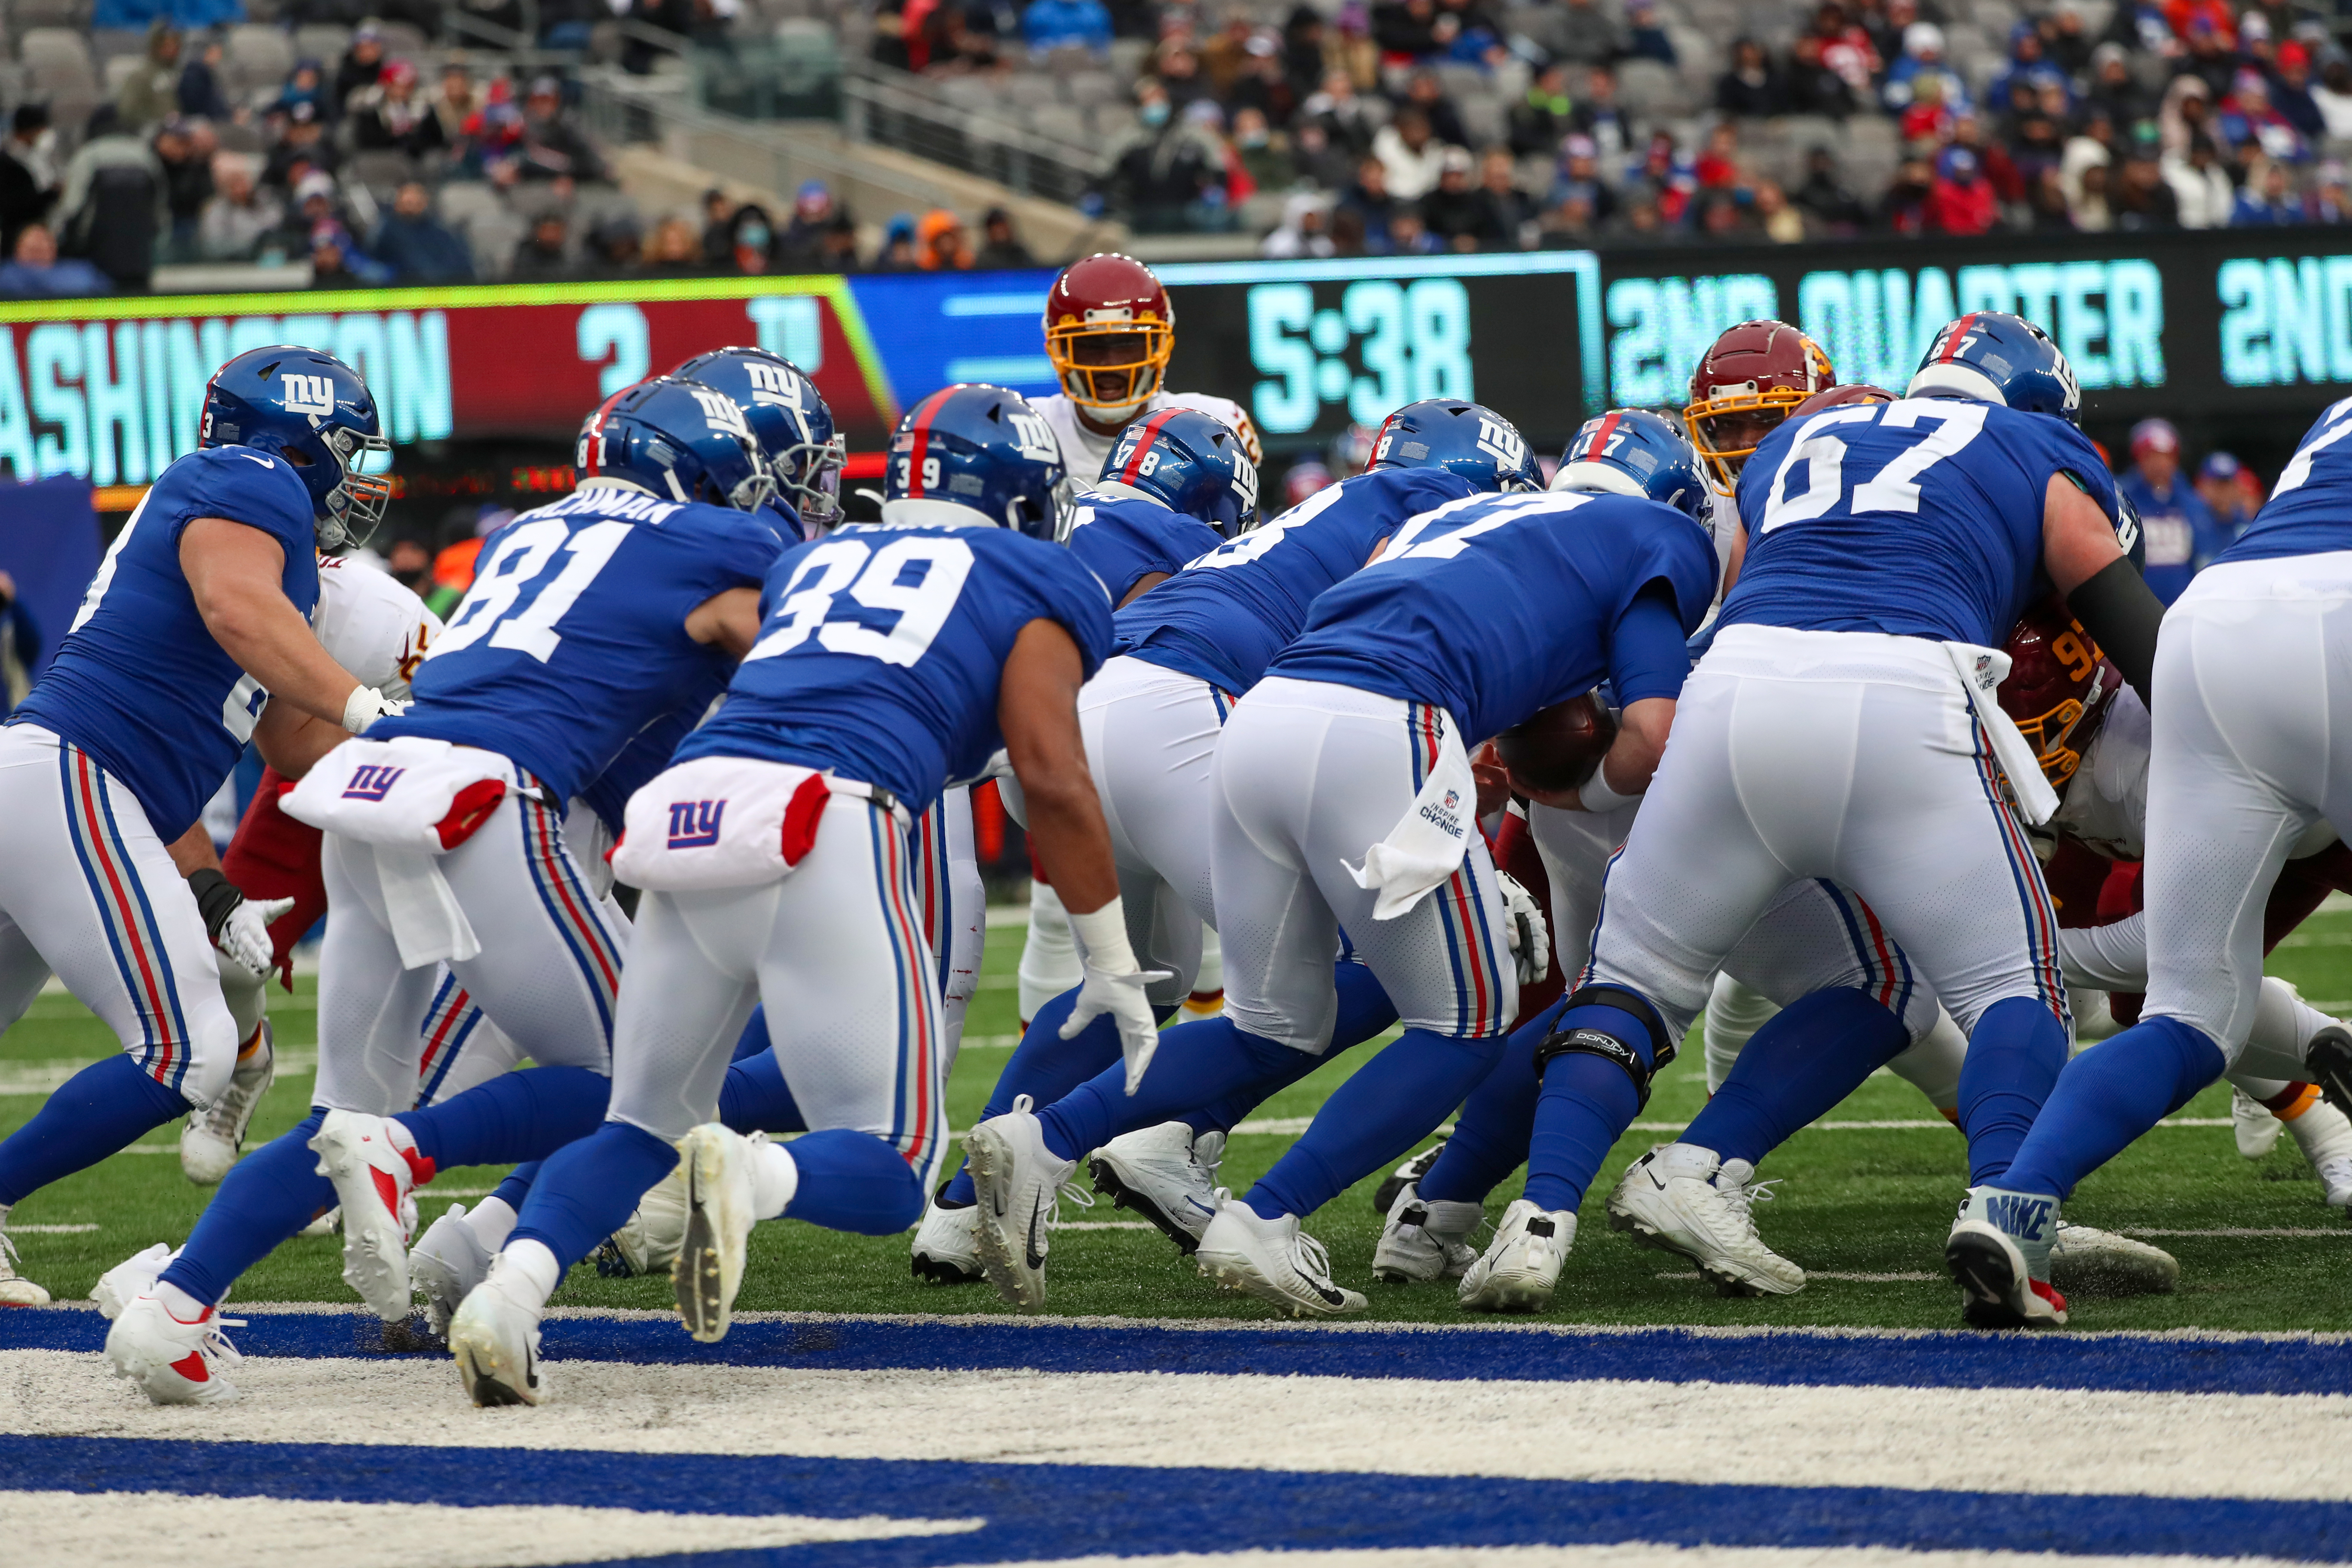 The New York Giants offense lines up in a victory formation of sorts as quarterback Jake Fromm (17) runs the ball into the line of scrimmage against the Washington Football Team during the second quarter on Sunday, Jan. 9, 2022 in East Rutherford, N.J. Washington won, 22-7.